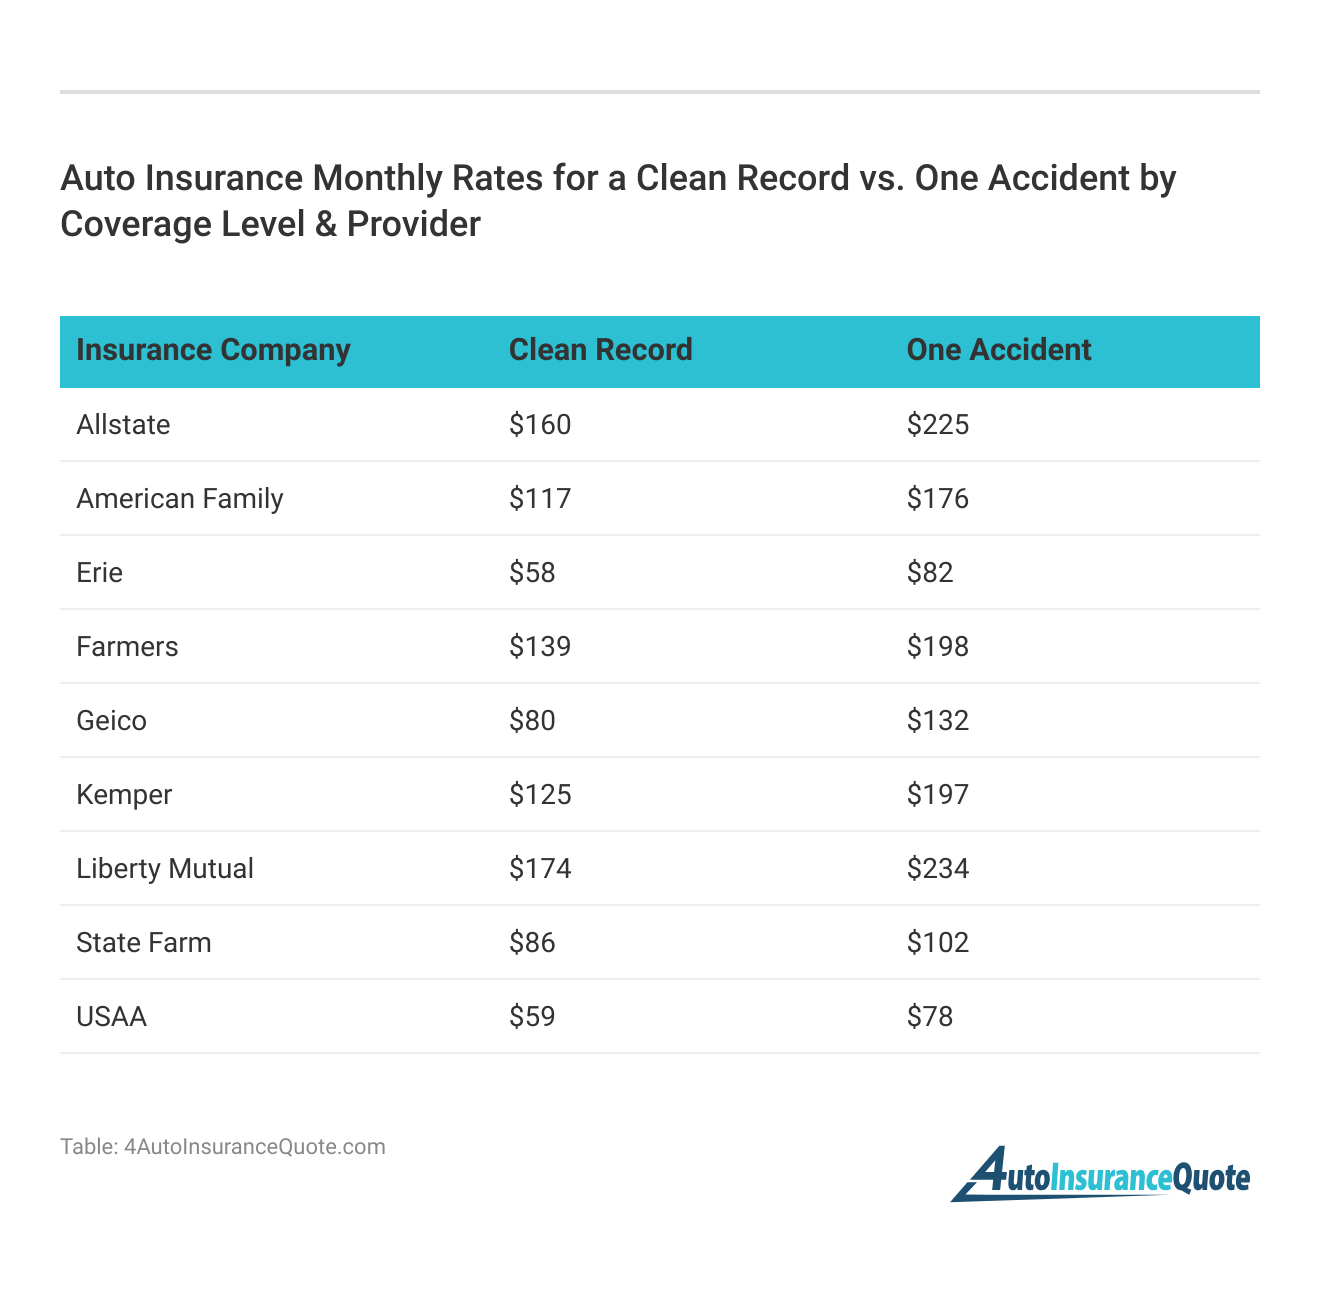 <h3>Auto Insurance Monthly Rates for a Clean Record vs. One Accident by Coverage Level & Provider</h3>